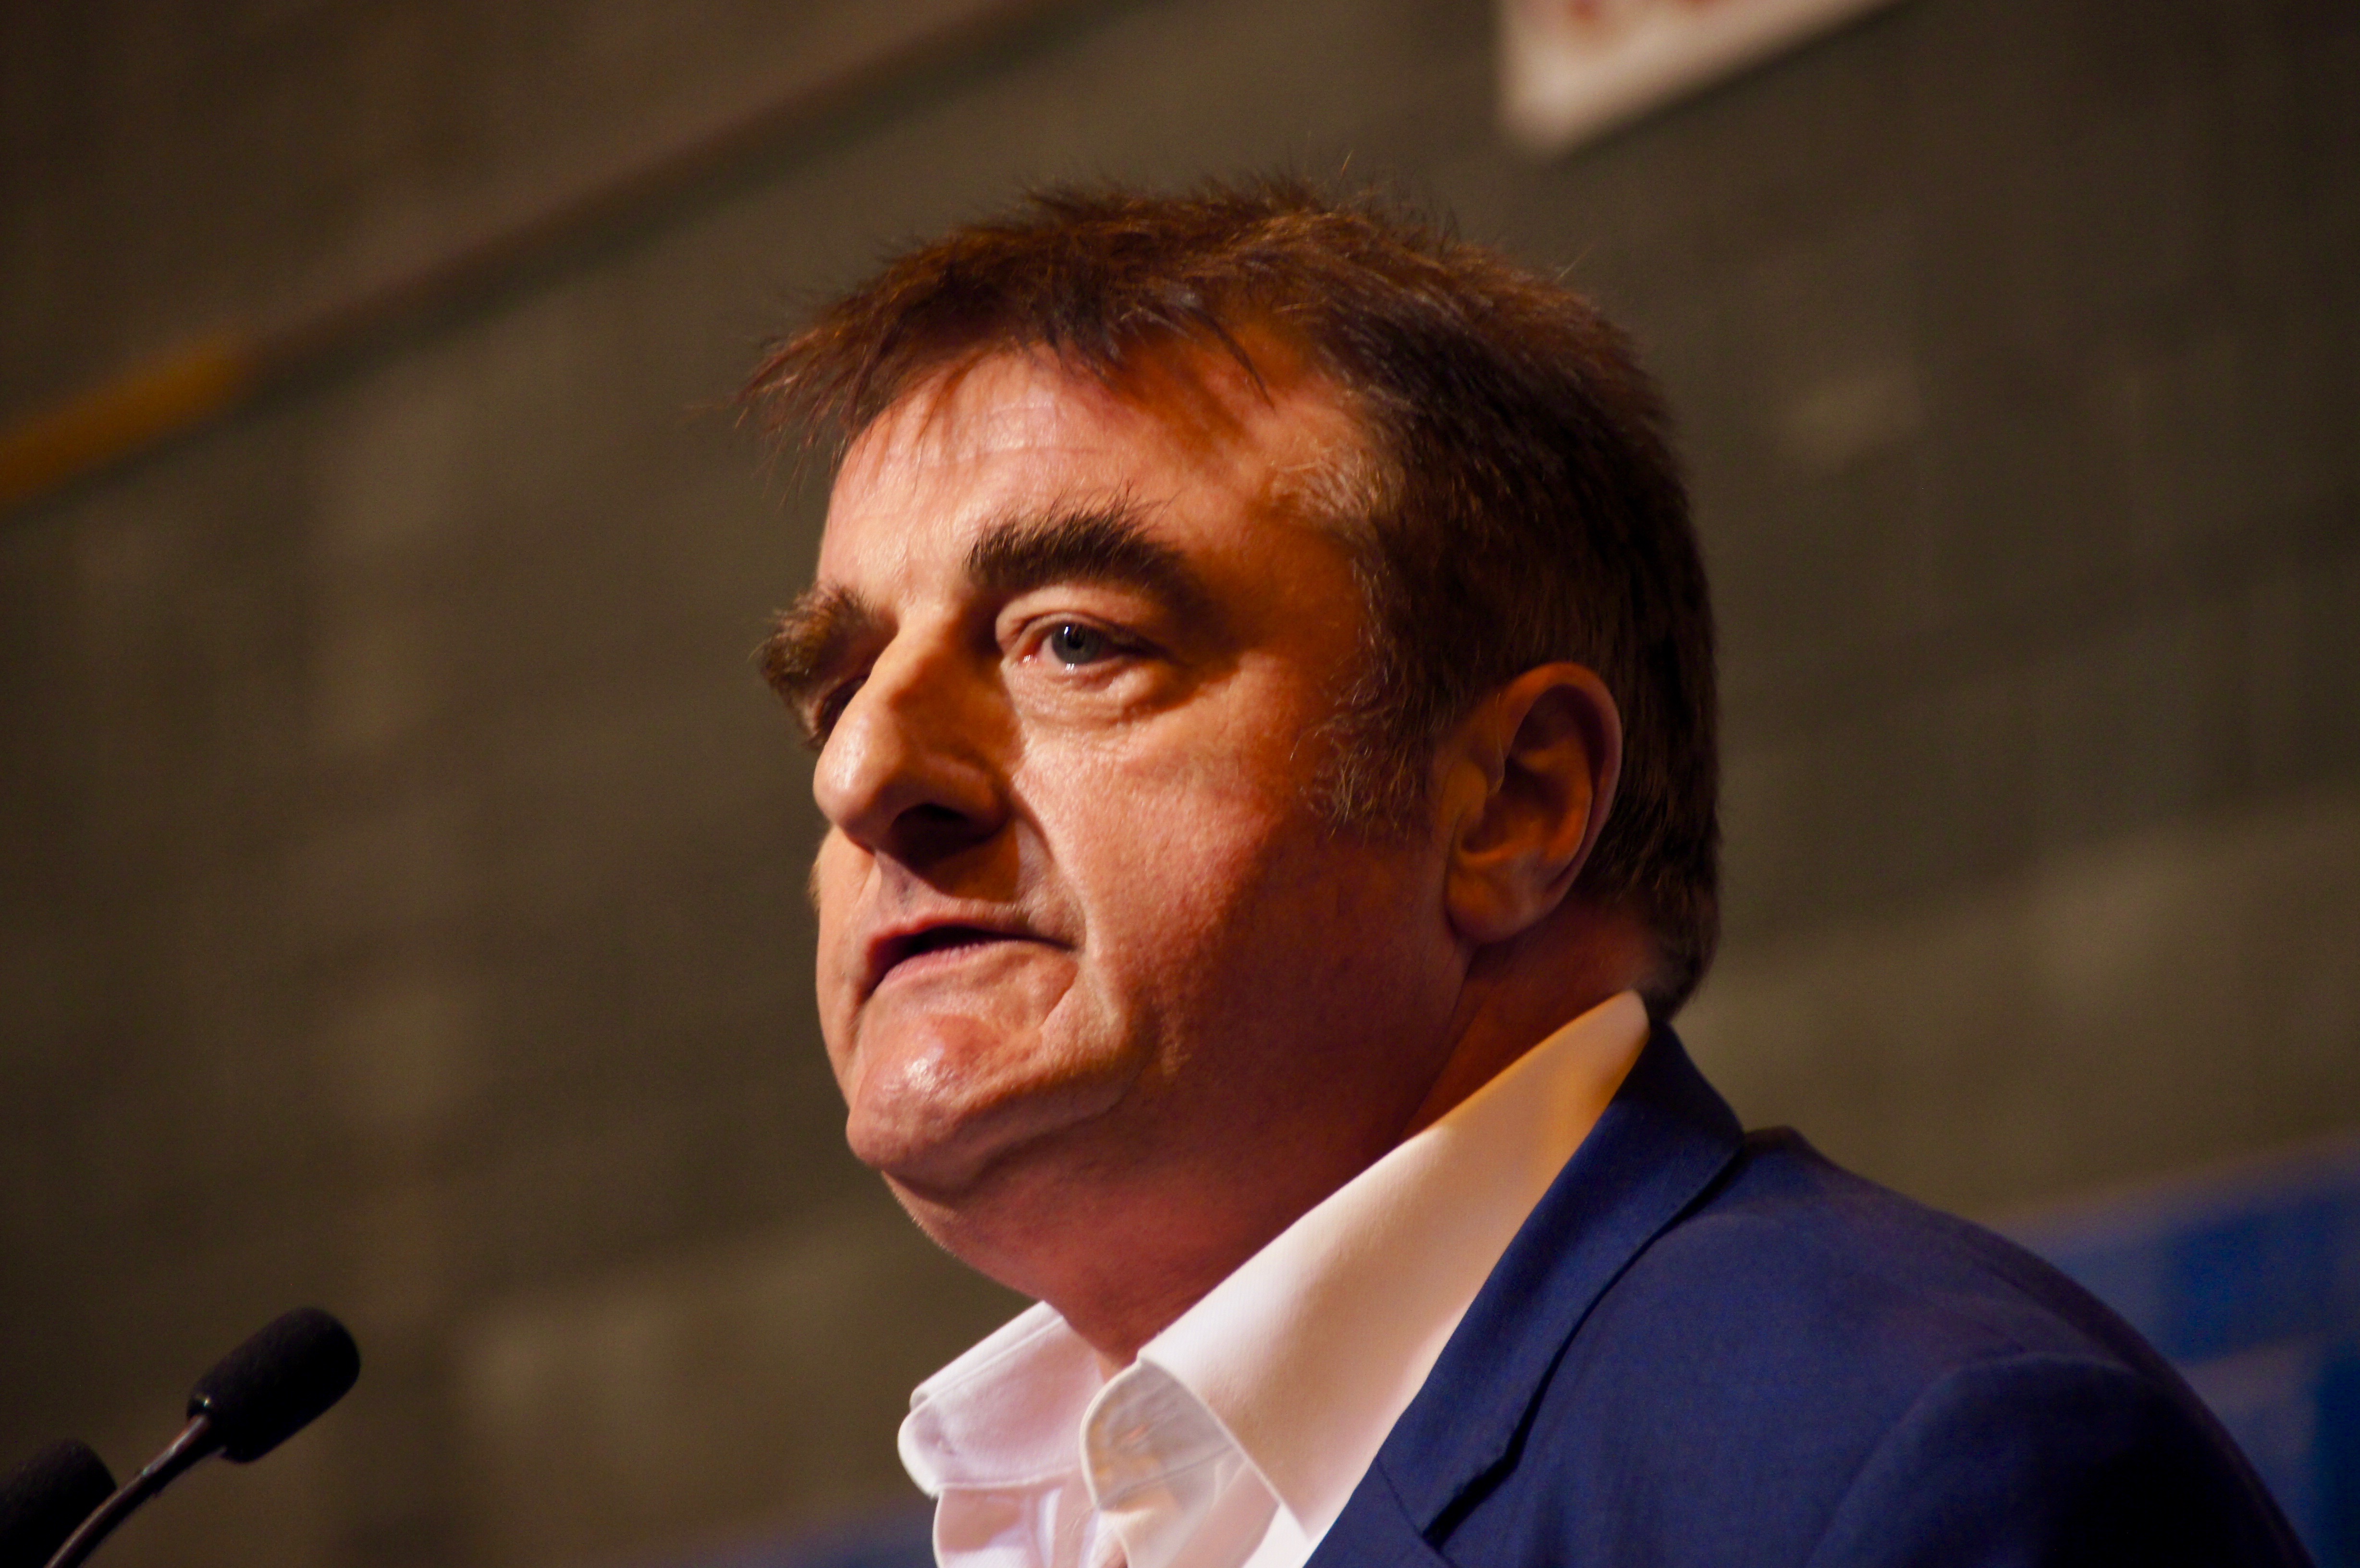 Tommy Sheppard MP elected for the second time at the General Election 2017